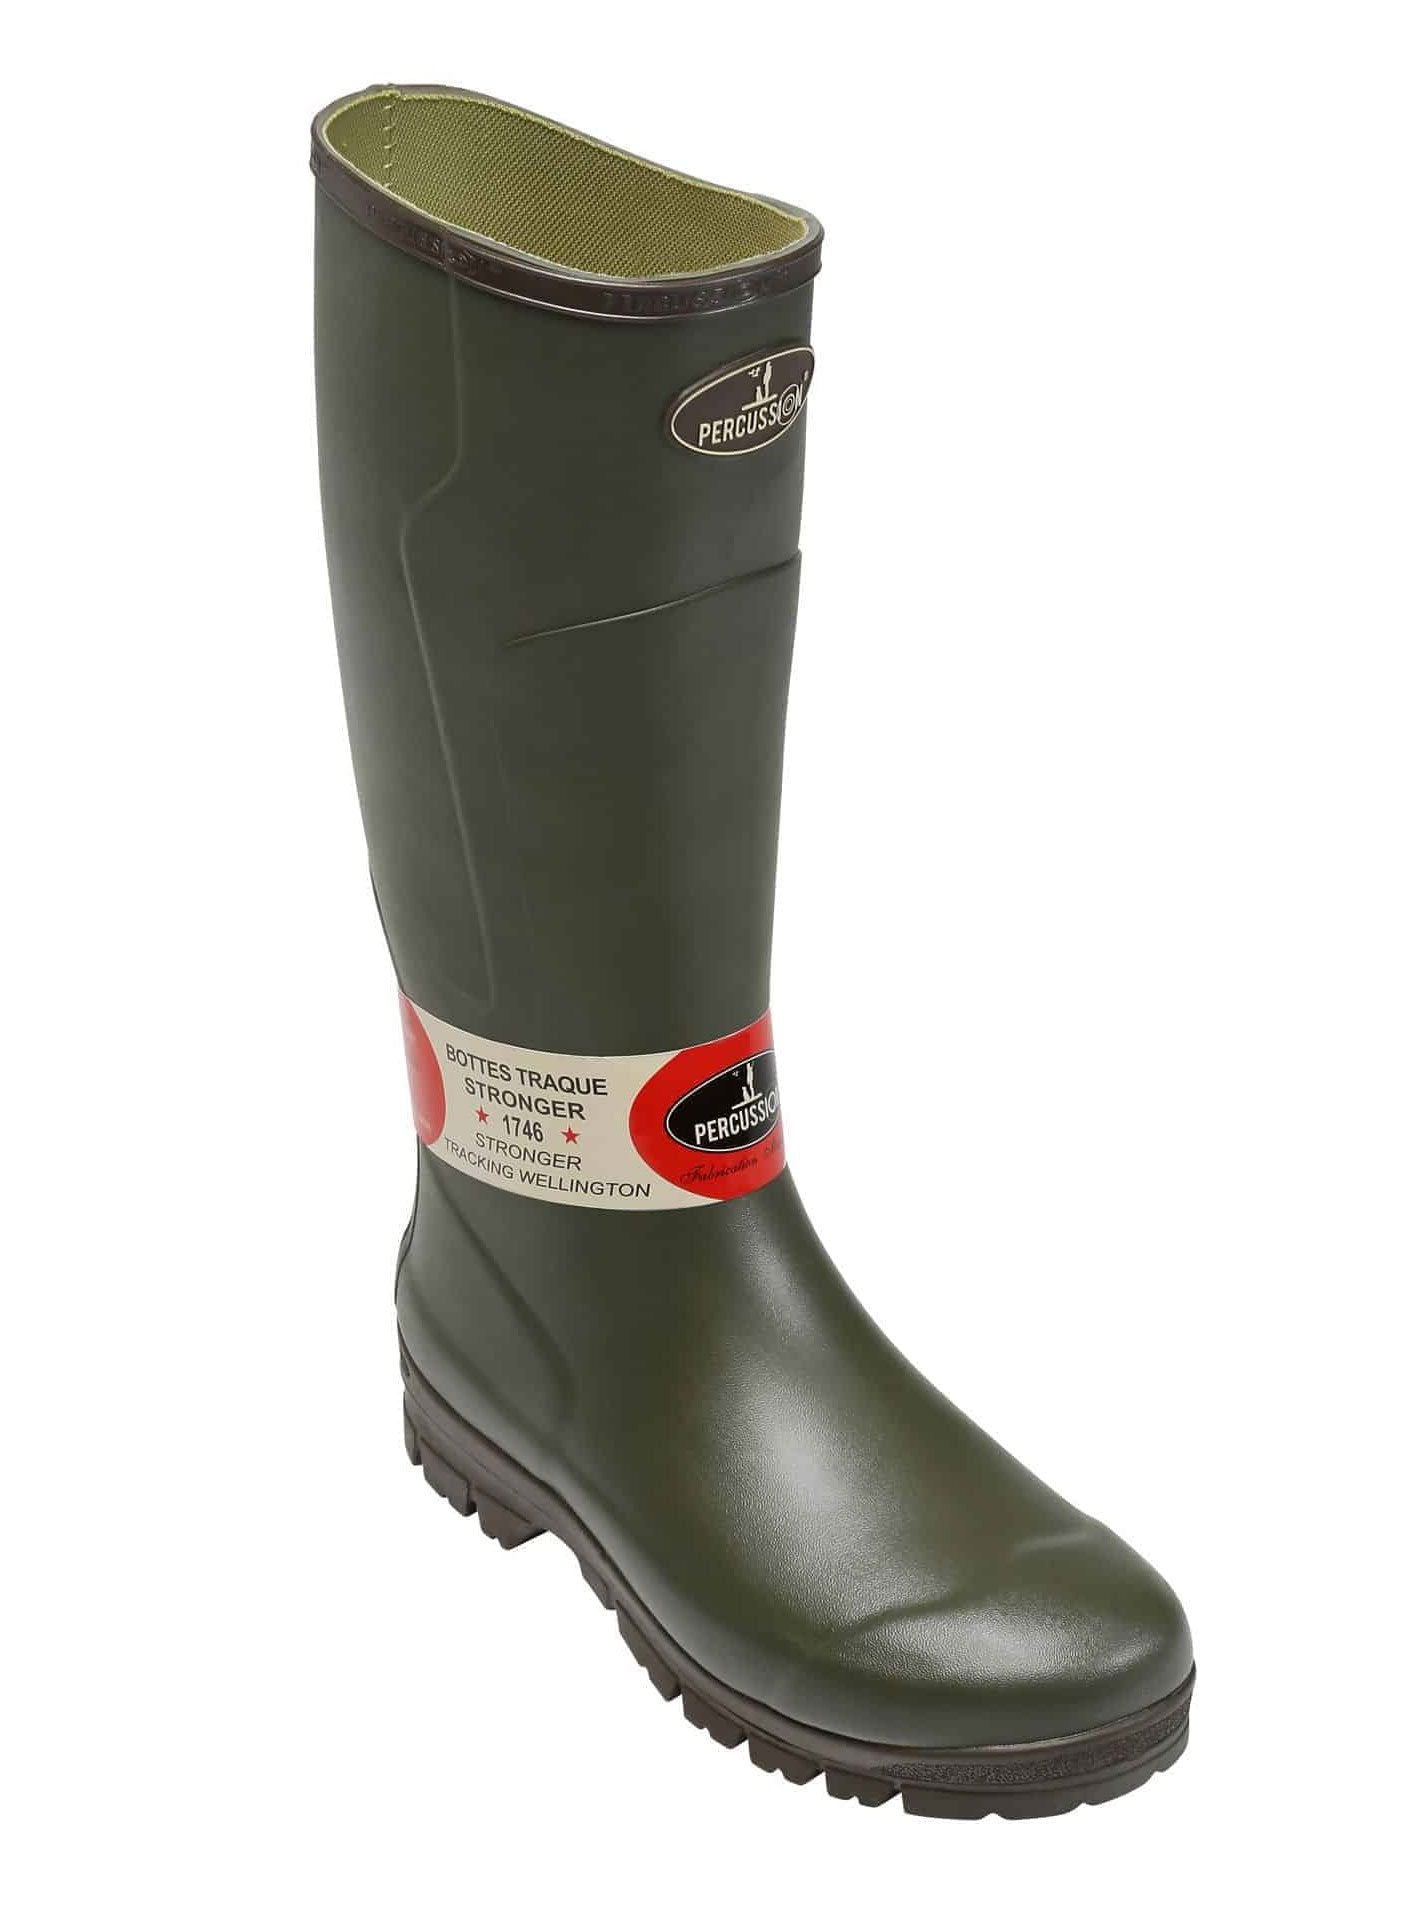 Percussion Stronger Beating Wellington Boots